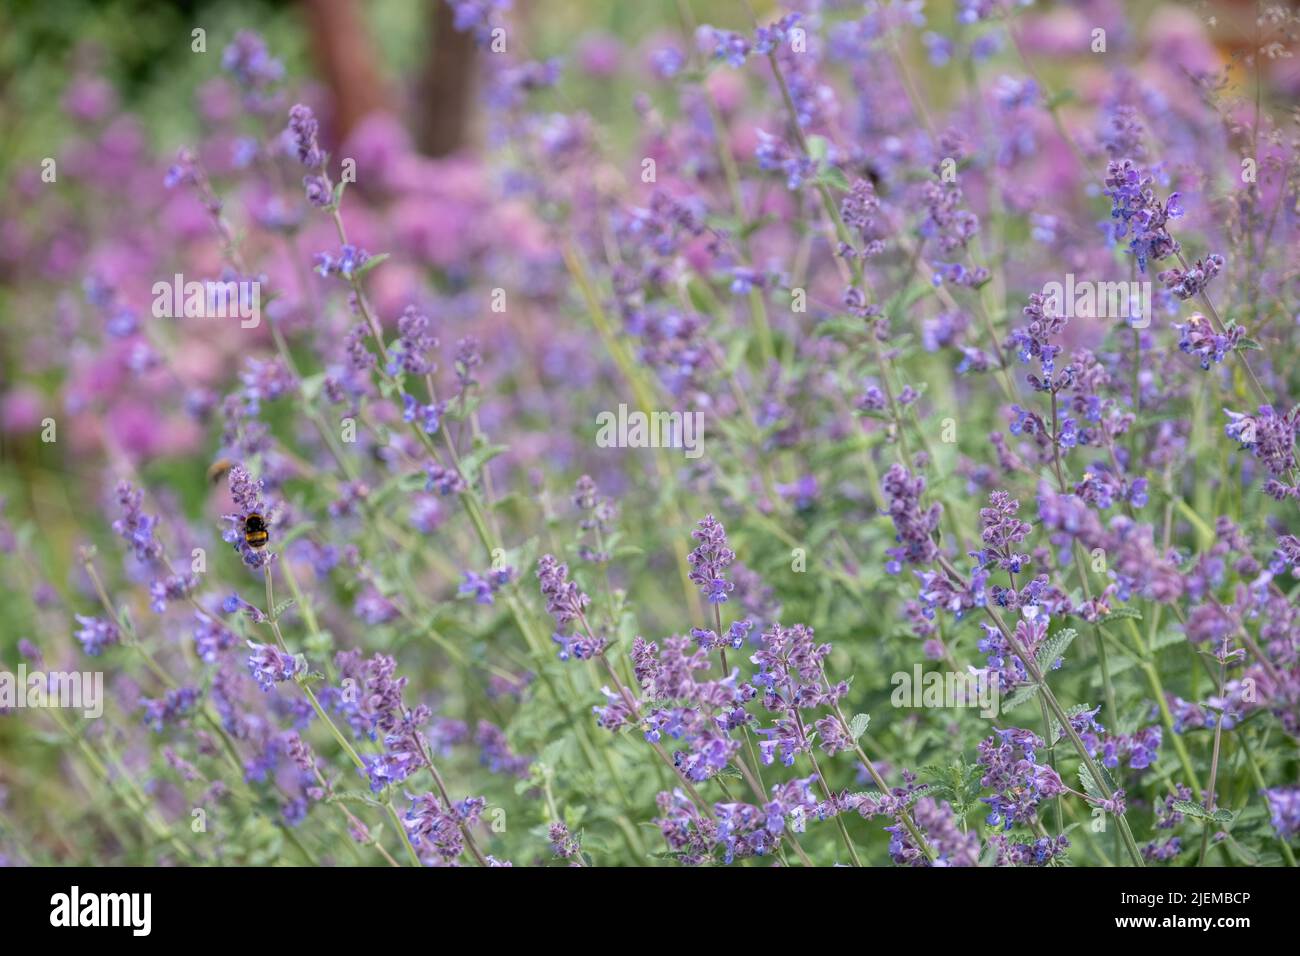 Salvia flowers in full bloom in a naturalistic perennial planting scheme coupled with grasses, at RHS Bridgewater, UK Stock Photo